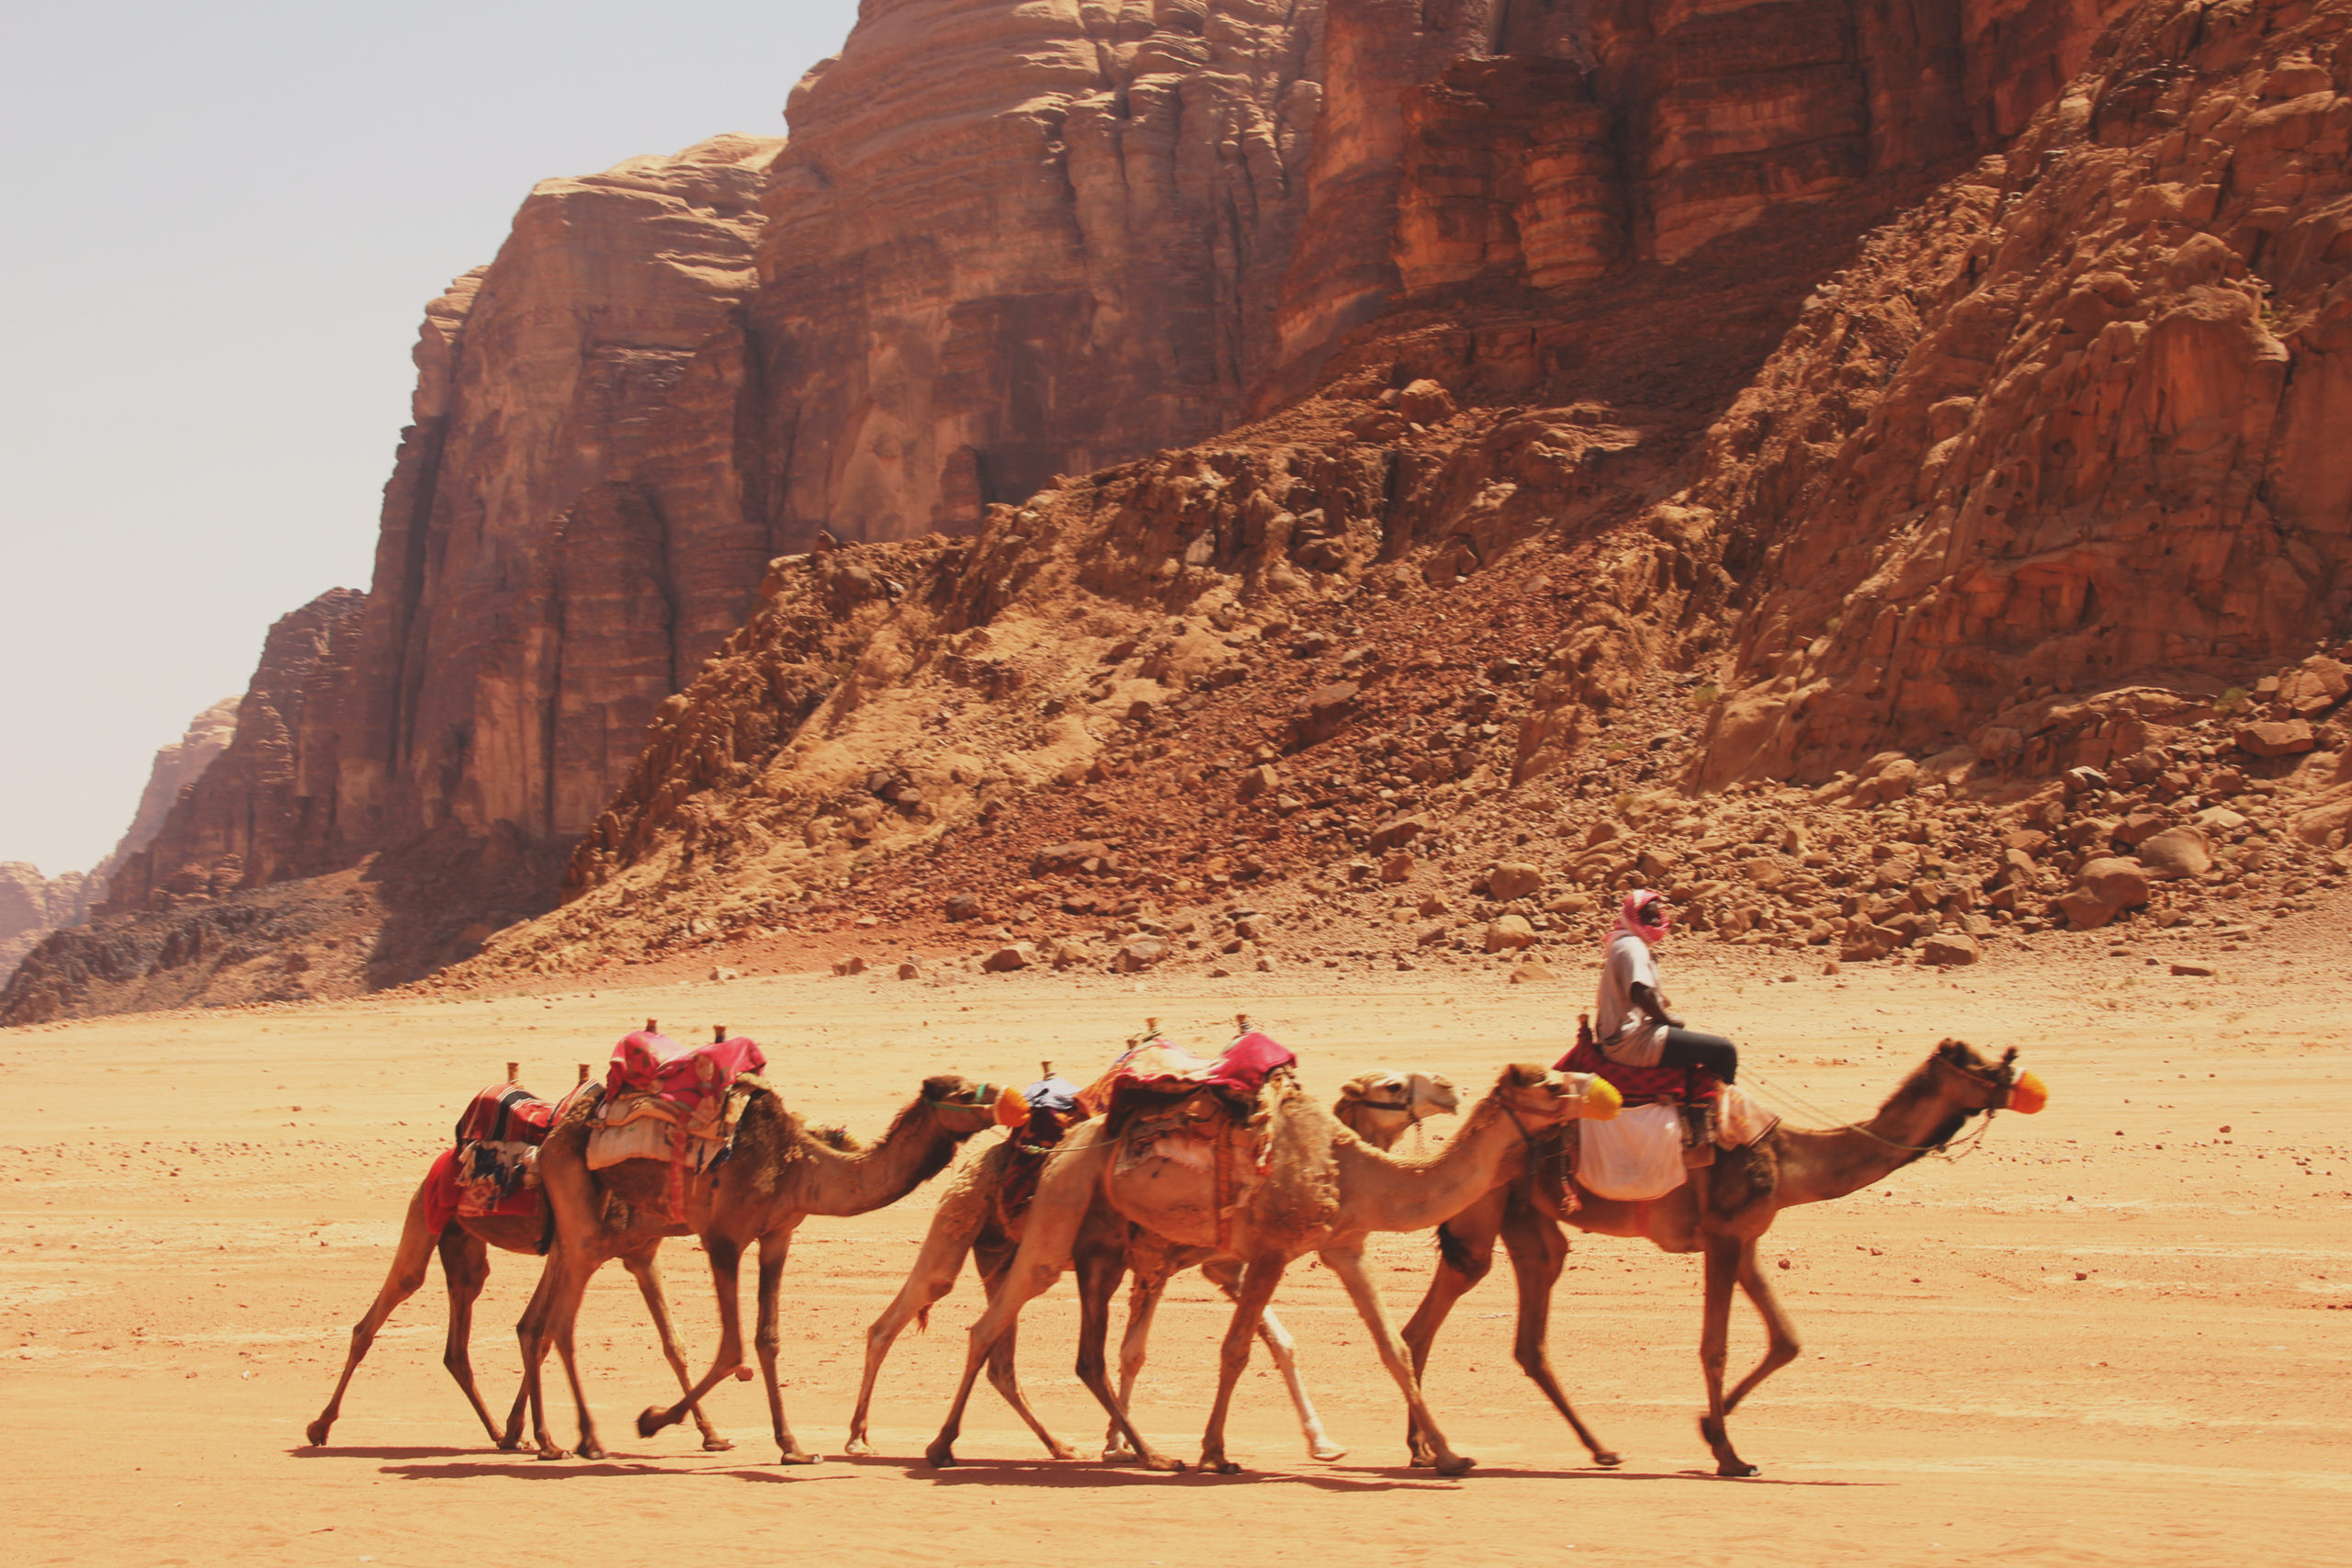 How to get to Wadi Rum